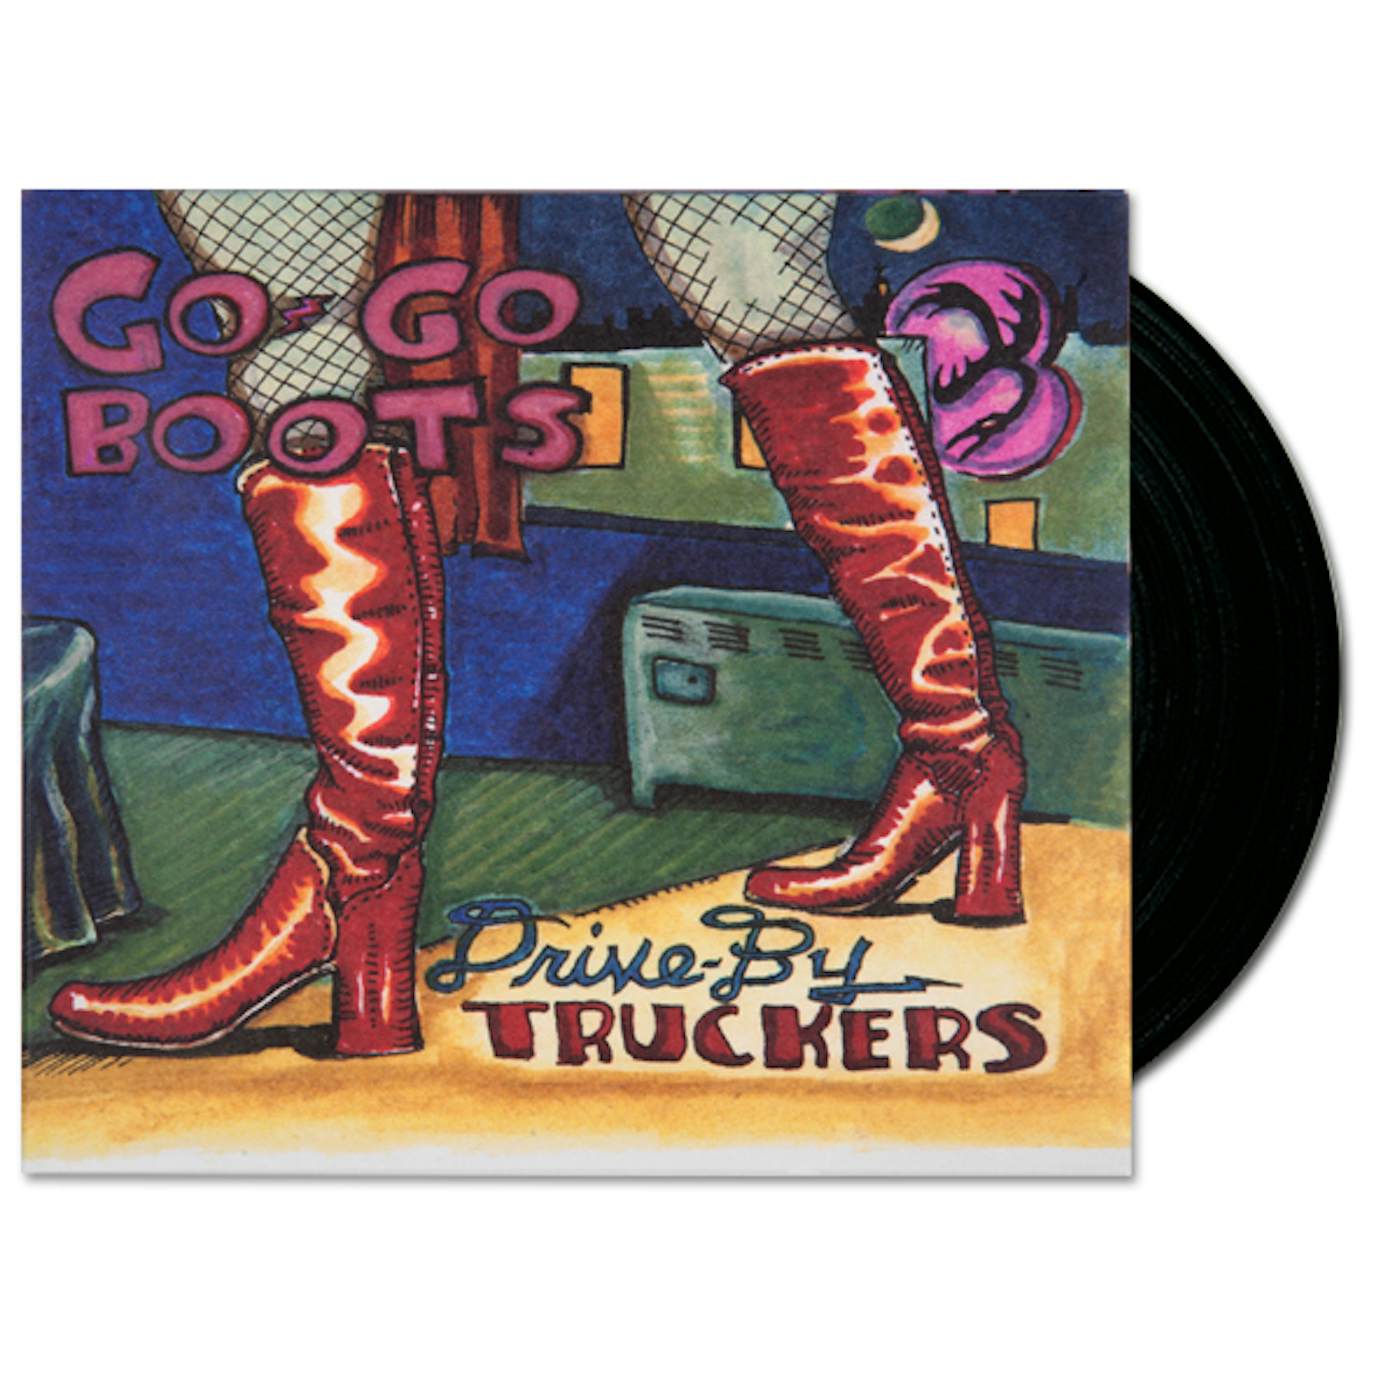 Drive-By Truckers Go-Go Boots LP (Vinyl)